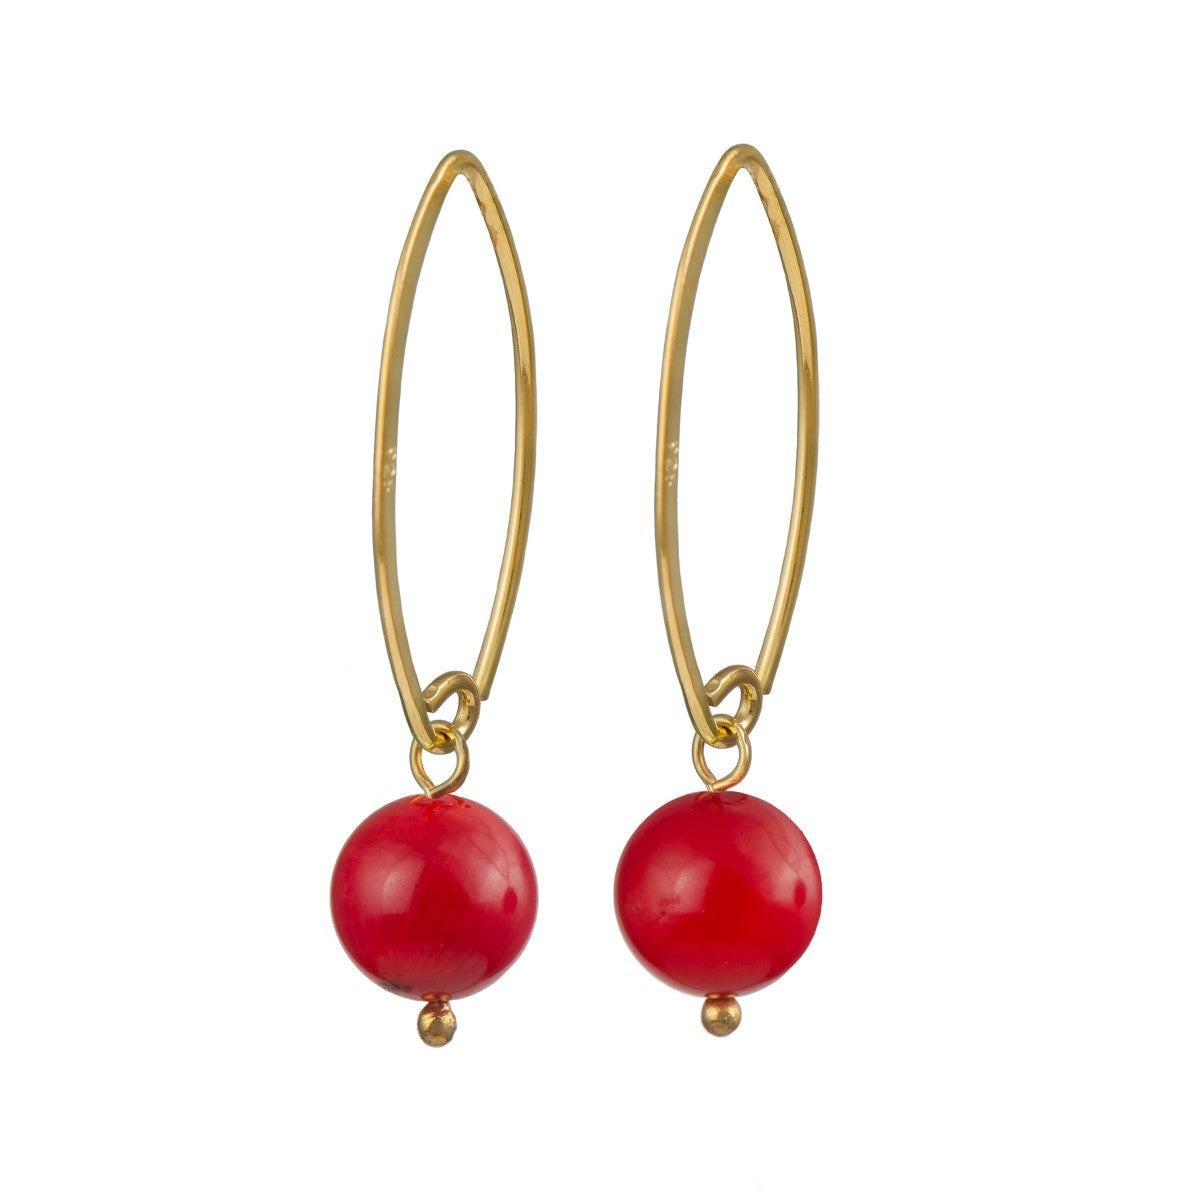 Gold Plated Sterling Silver Threader Earrings - Coral Drop